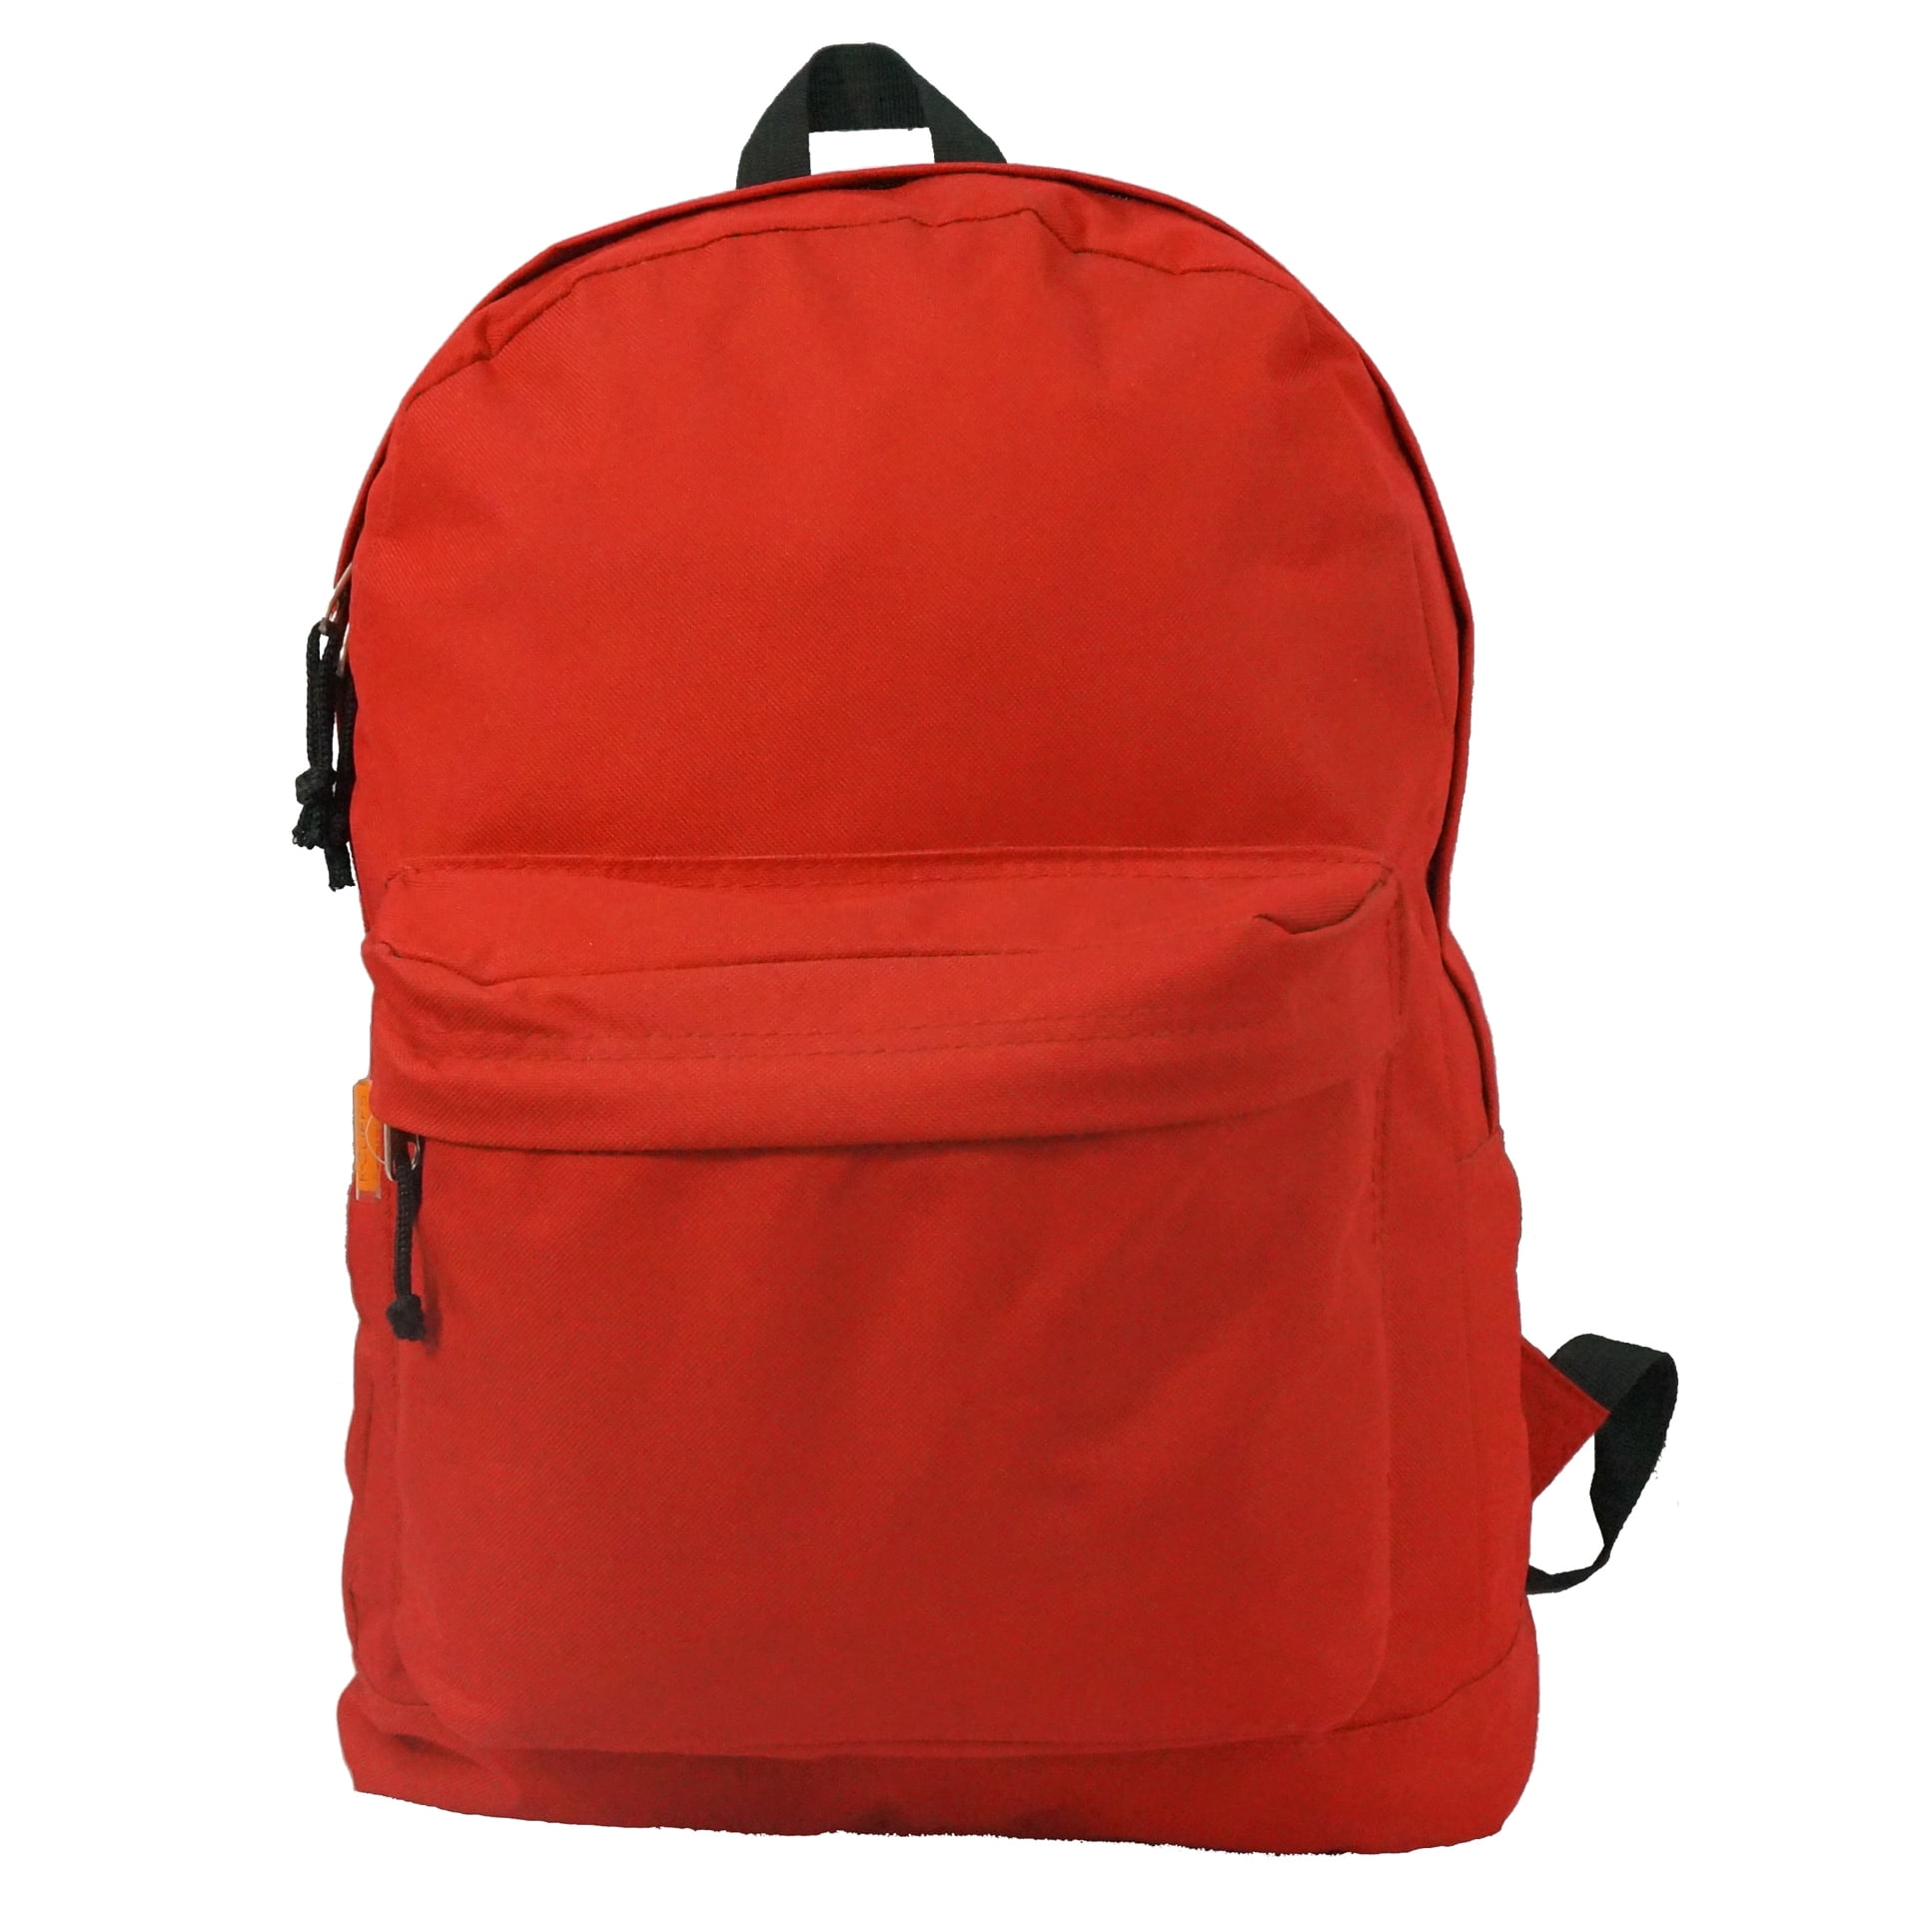 Shop RED BACKPACK PURSE C/P 16 in Wholesale Bags